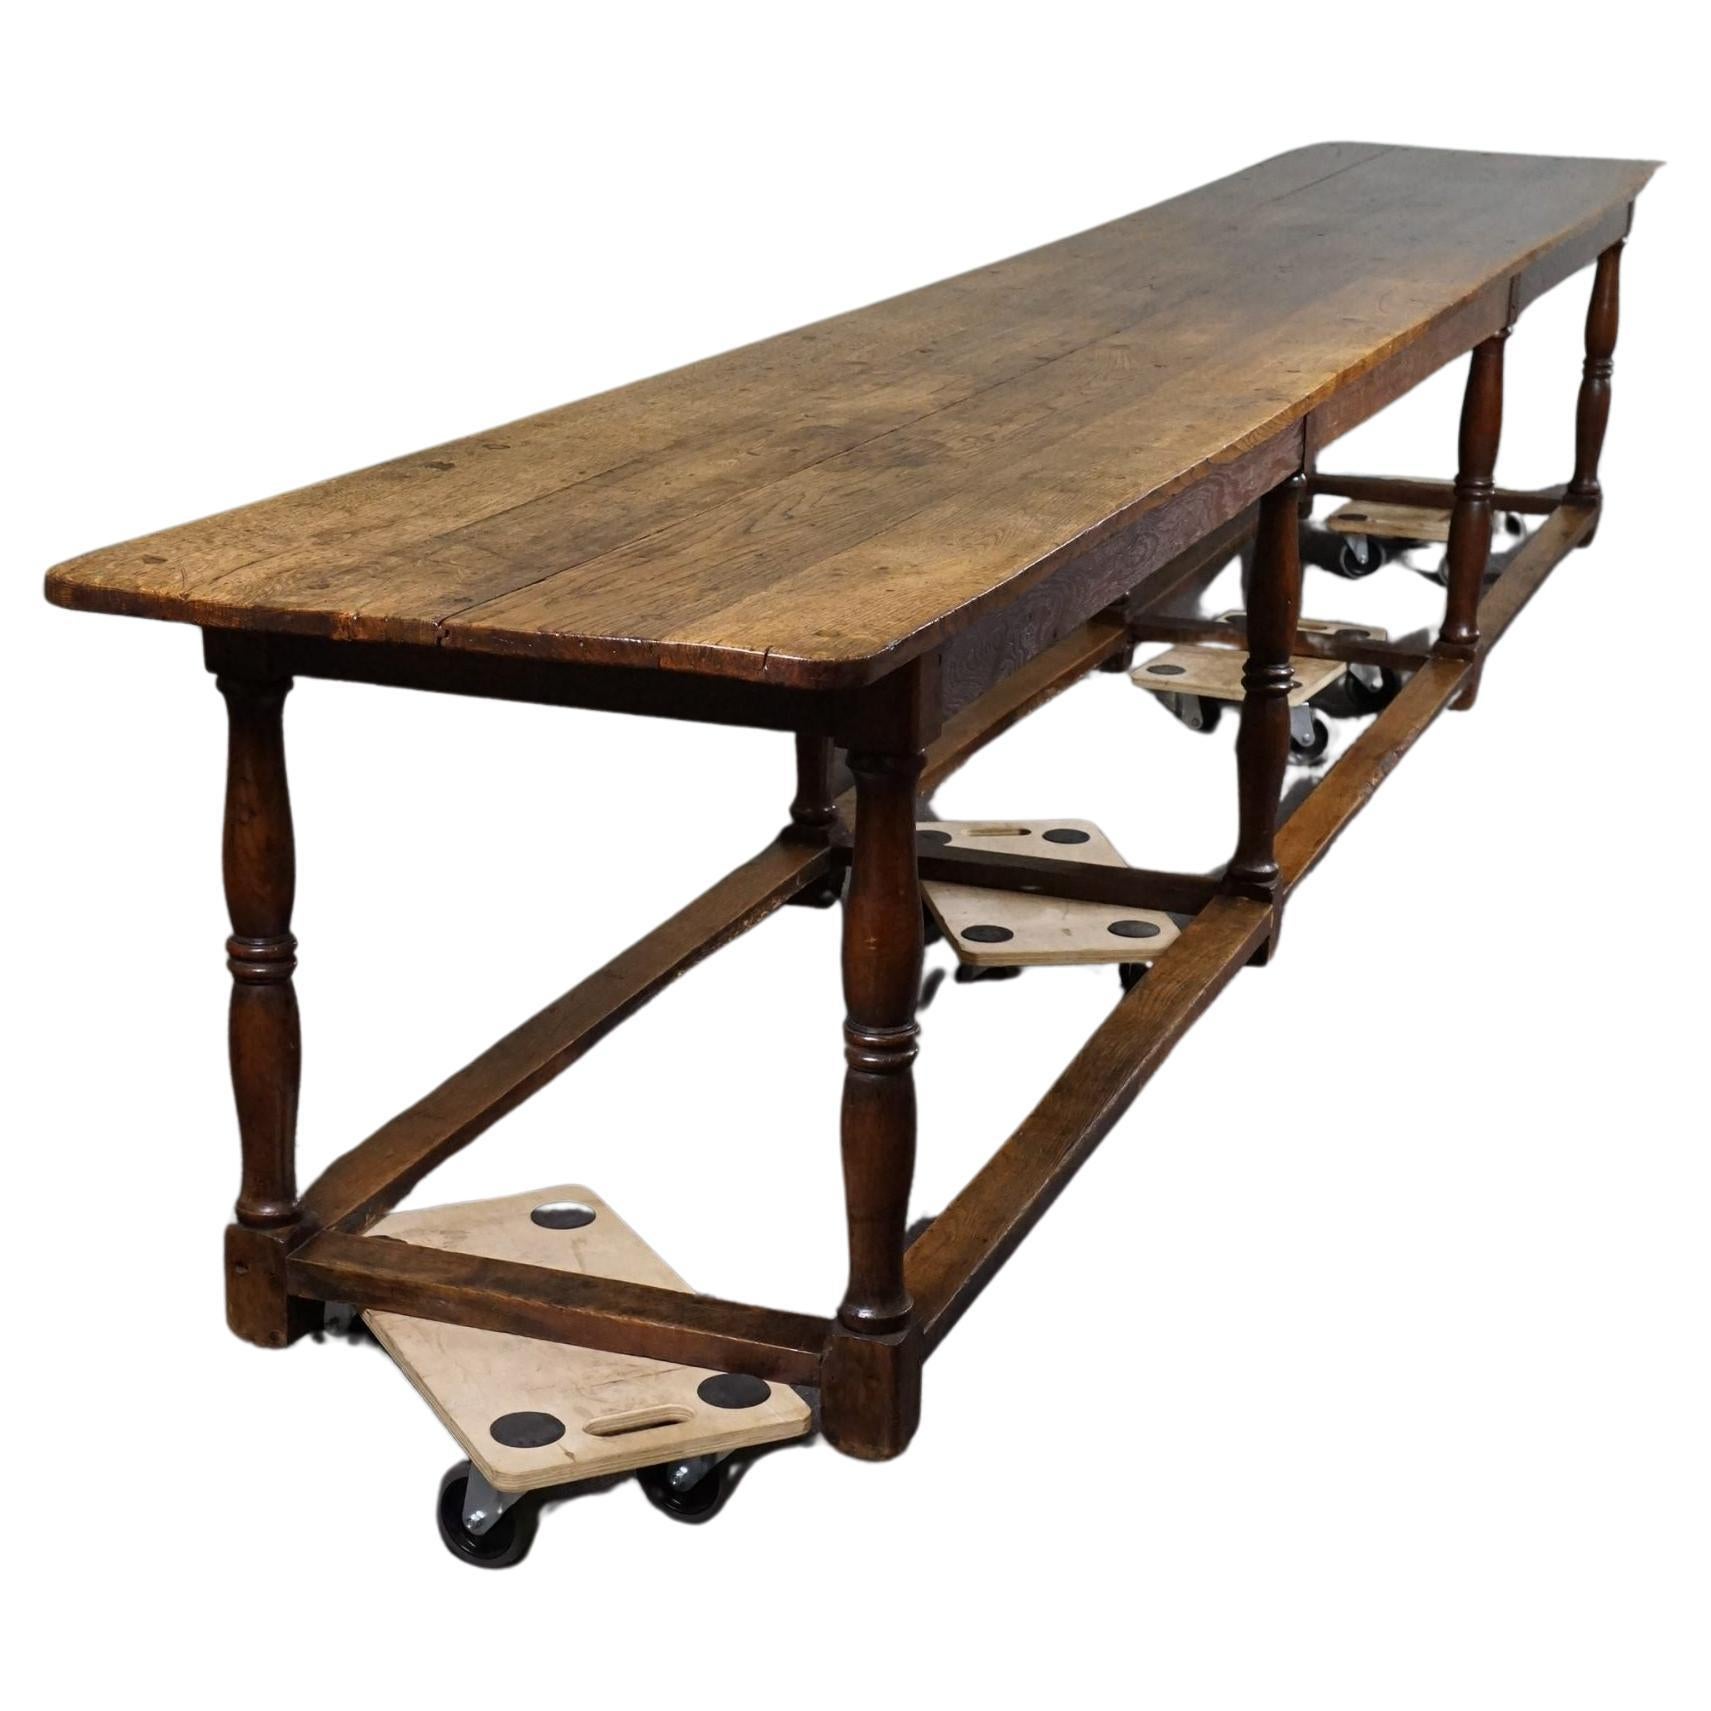 Very long antique 19th century English oak diningtable, 5 meter, Refectory table For Sale